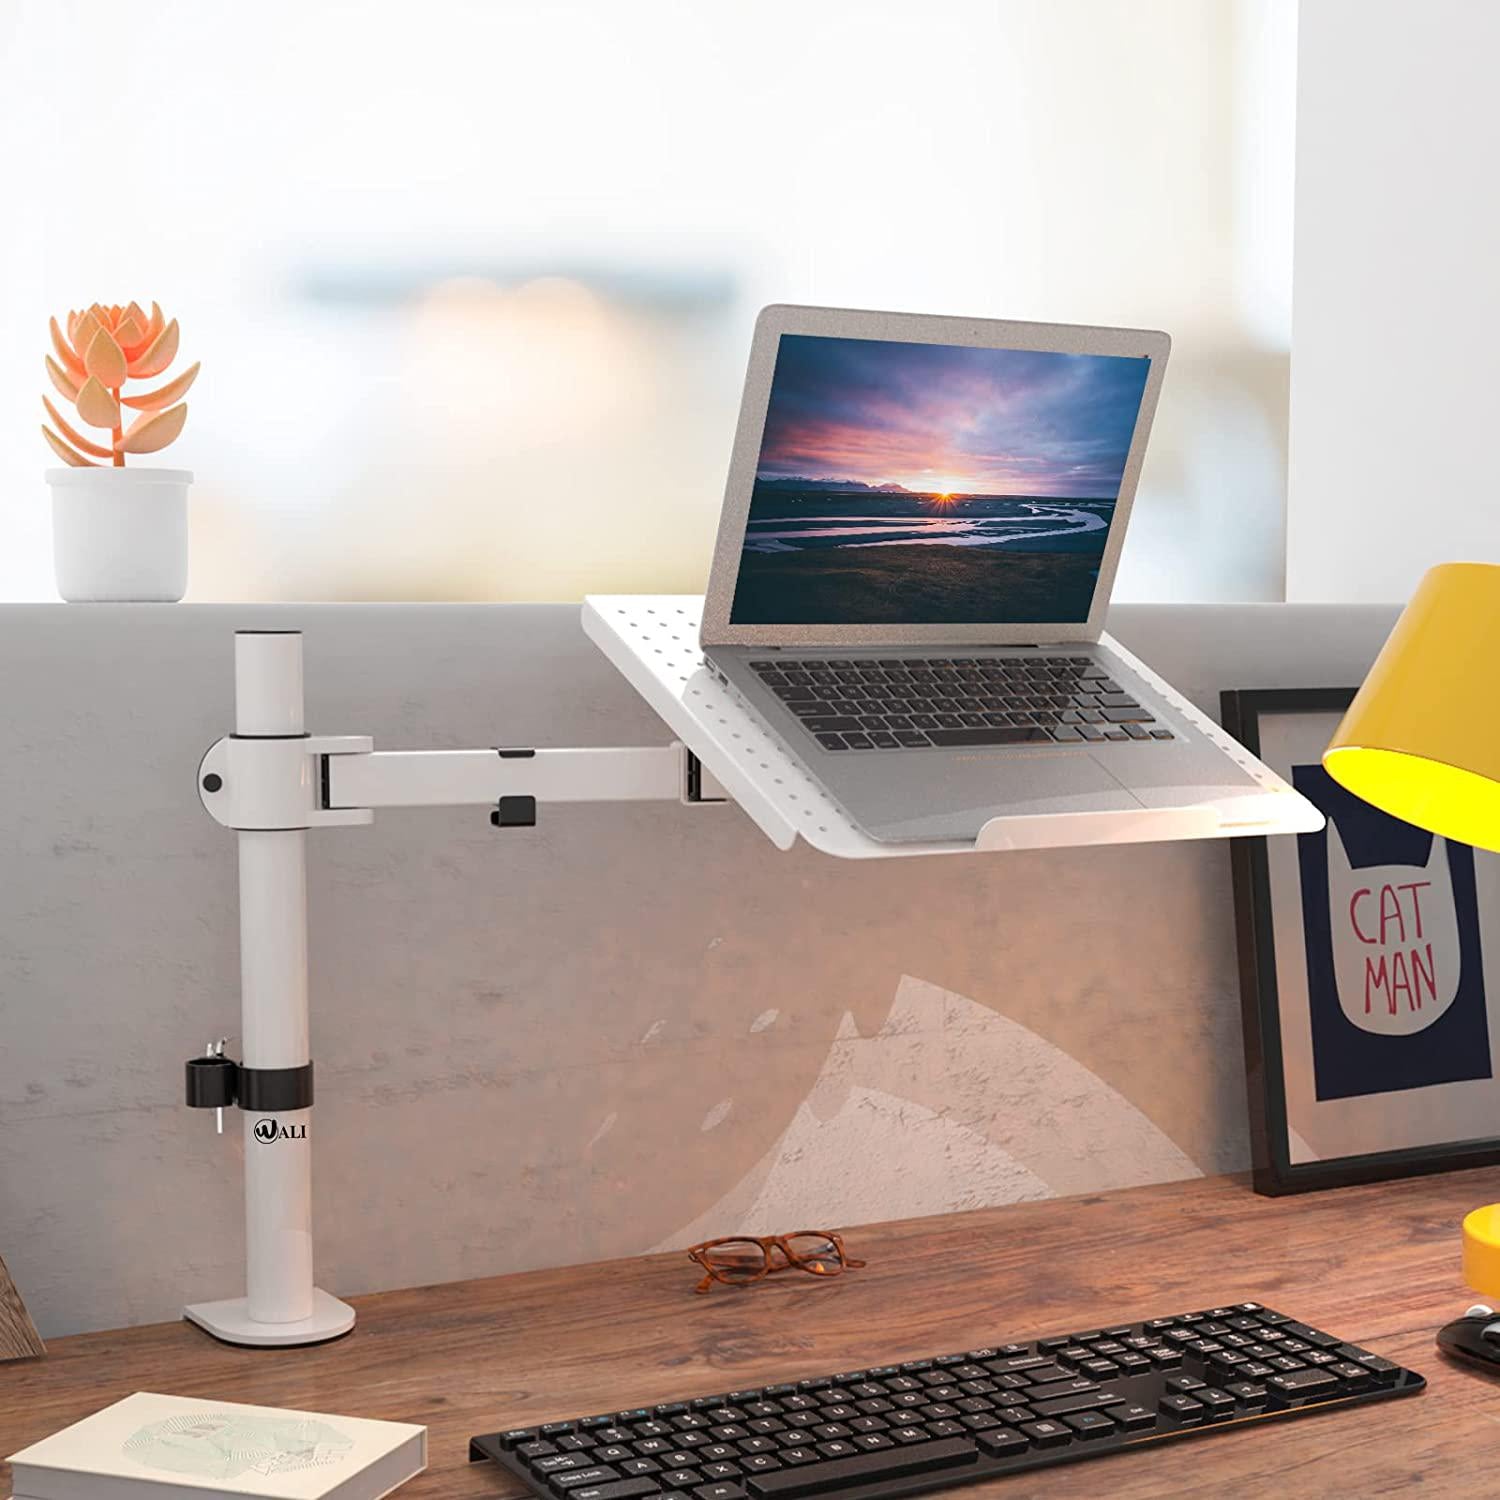 WALI, Laptop Mount Arm for Desk, VESA Laptop Tray, Fully Adjustable, up to 17 inch, 22lbs, with Vented Cooling Platform Stand (M00LP-W), White by WALI